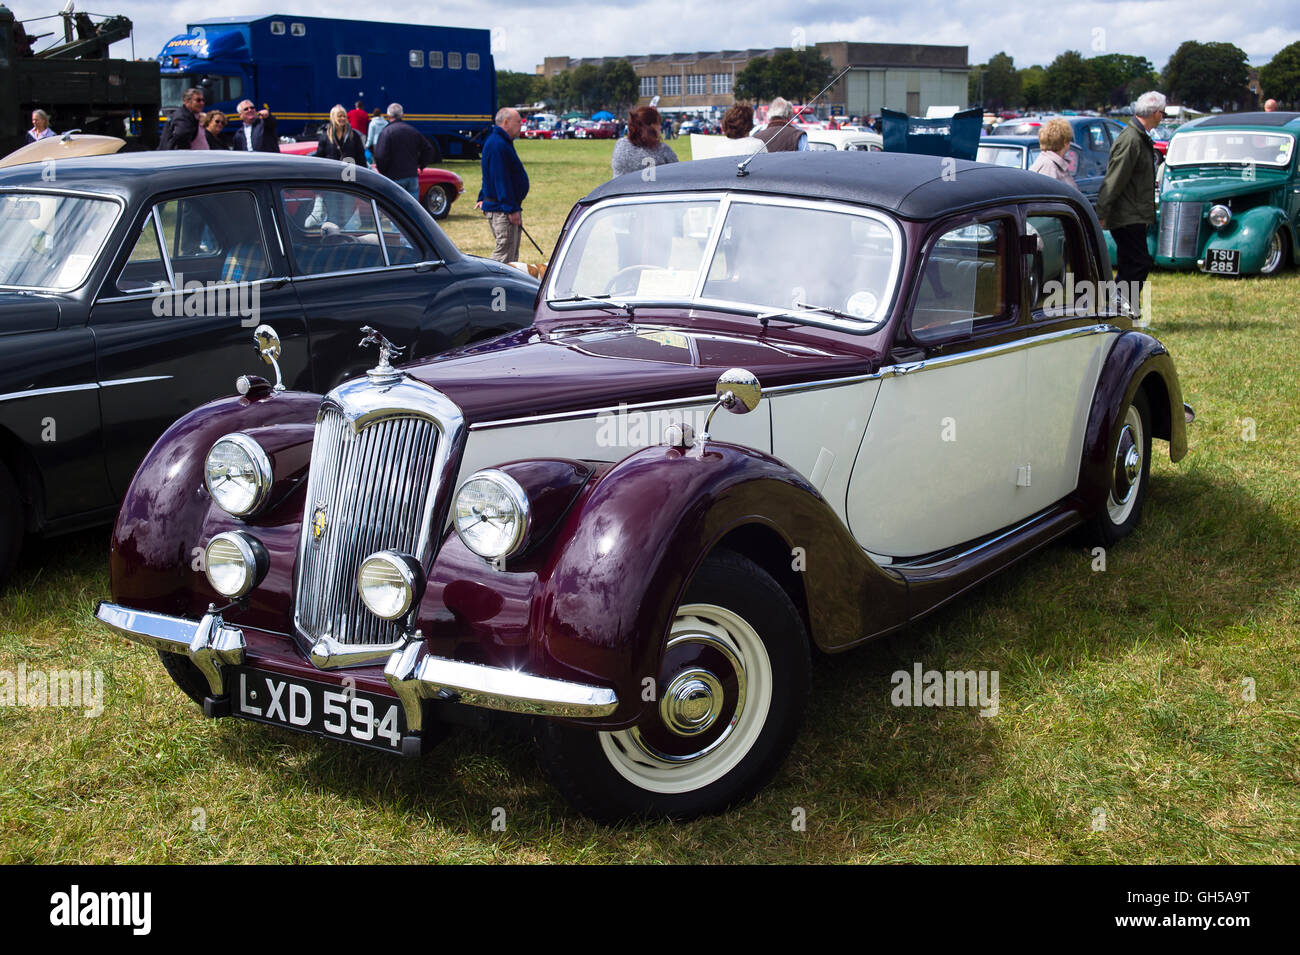 Riley 2.5 litre saloon car at an English show Stock Photo